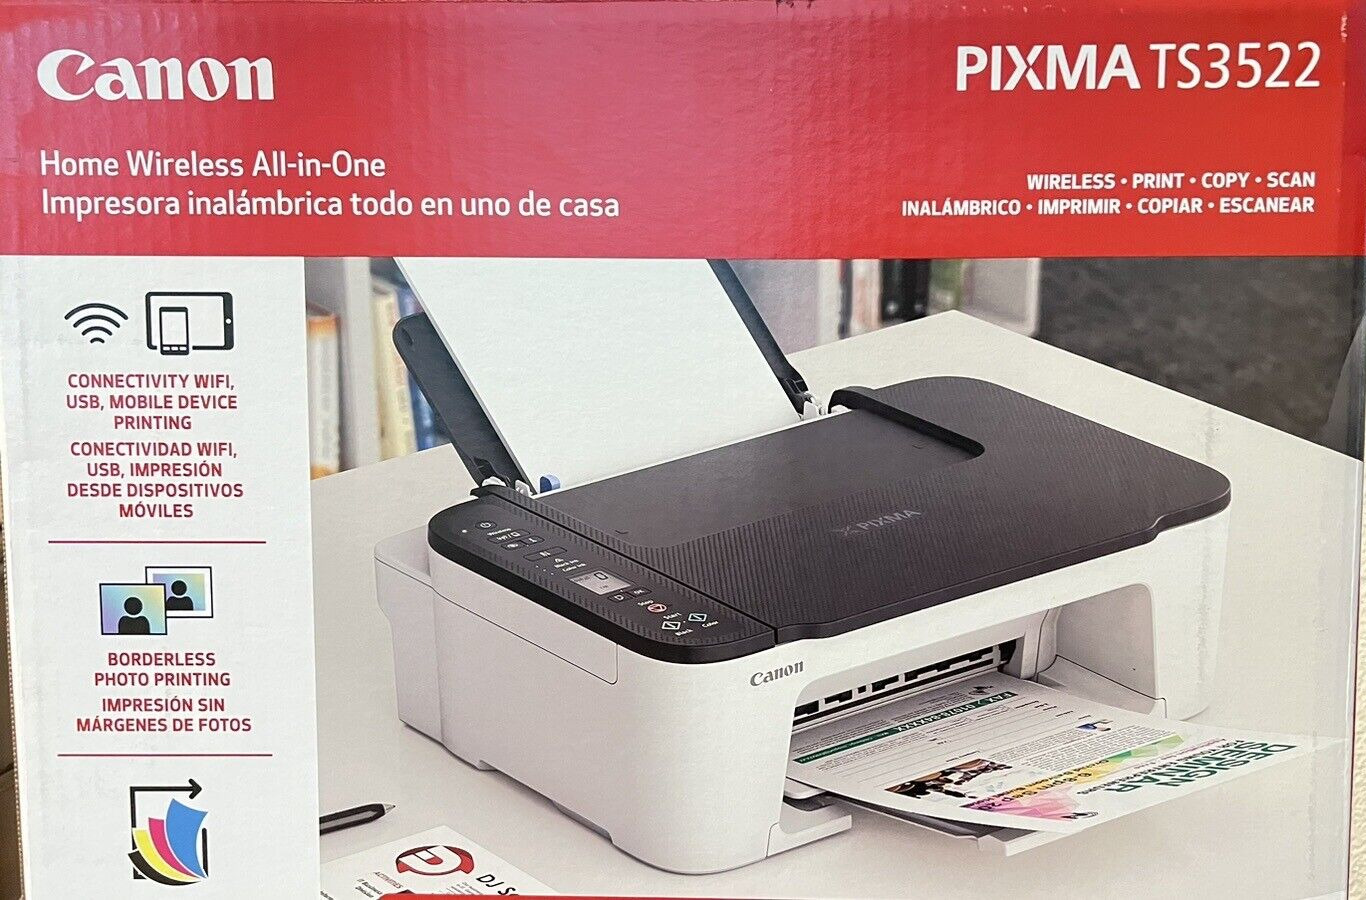 New Canon PIXMA TS3520(3620) All in One Printer-Wireless-Android Print-Gift